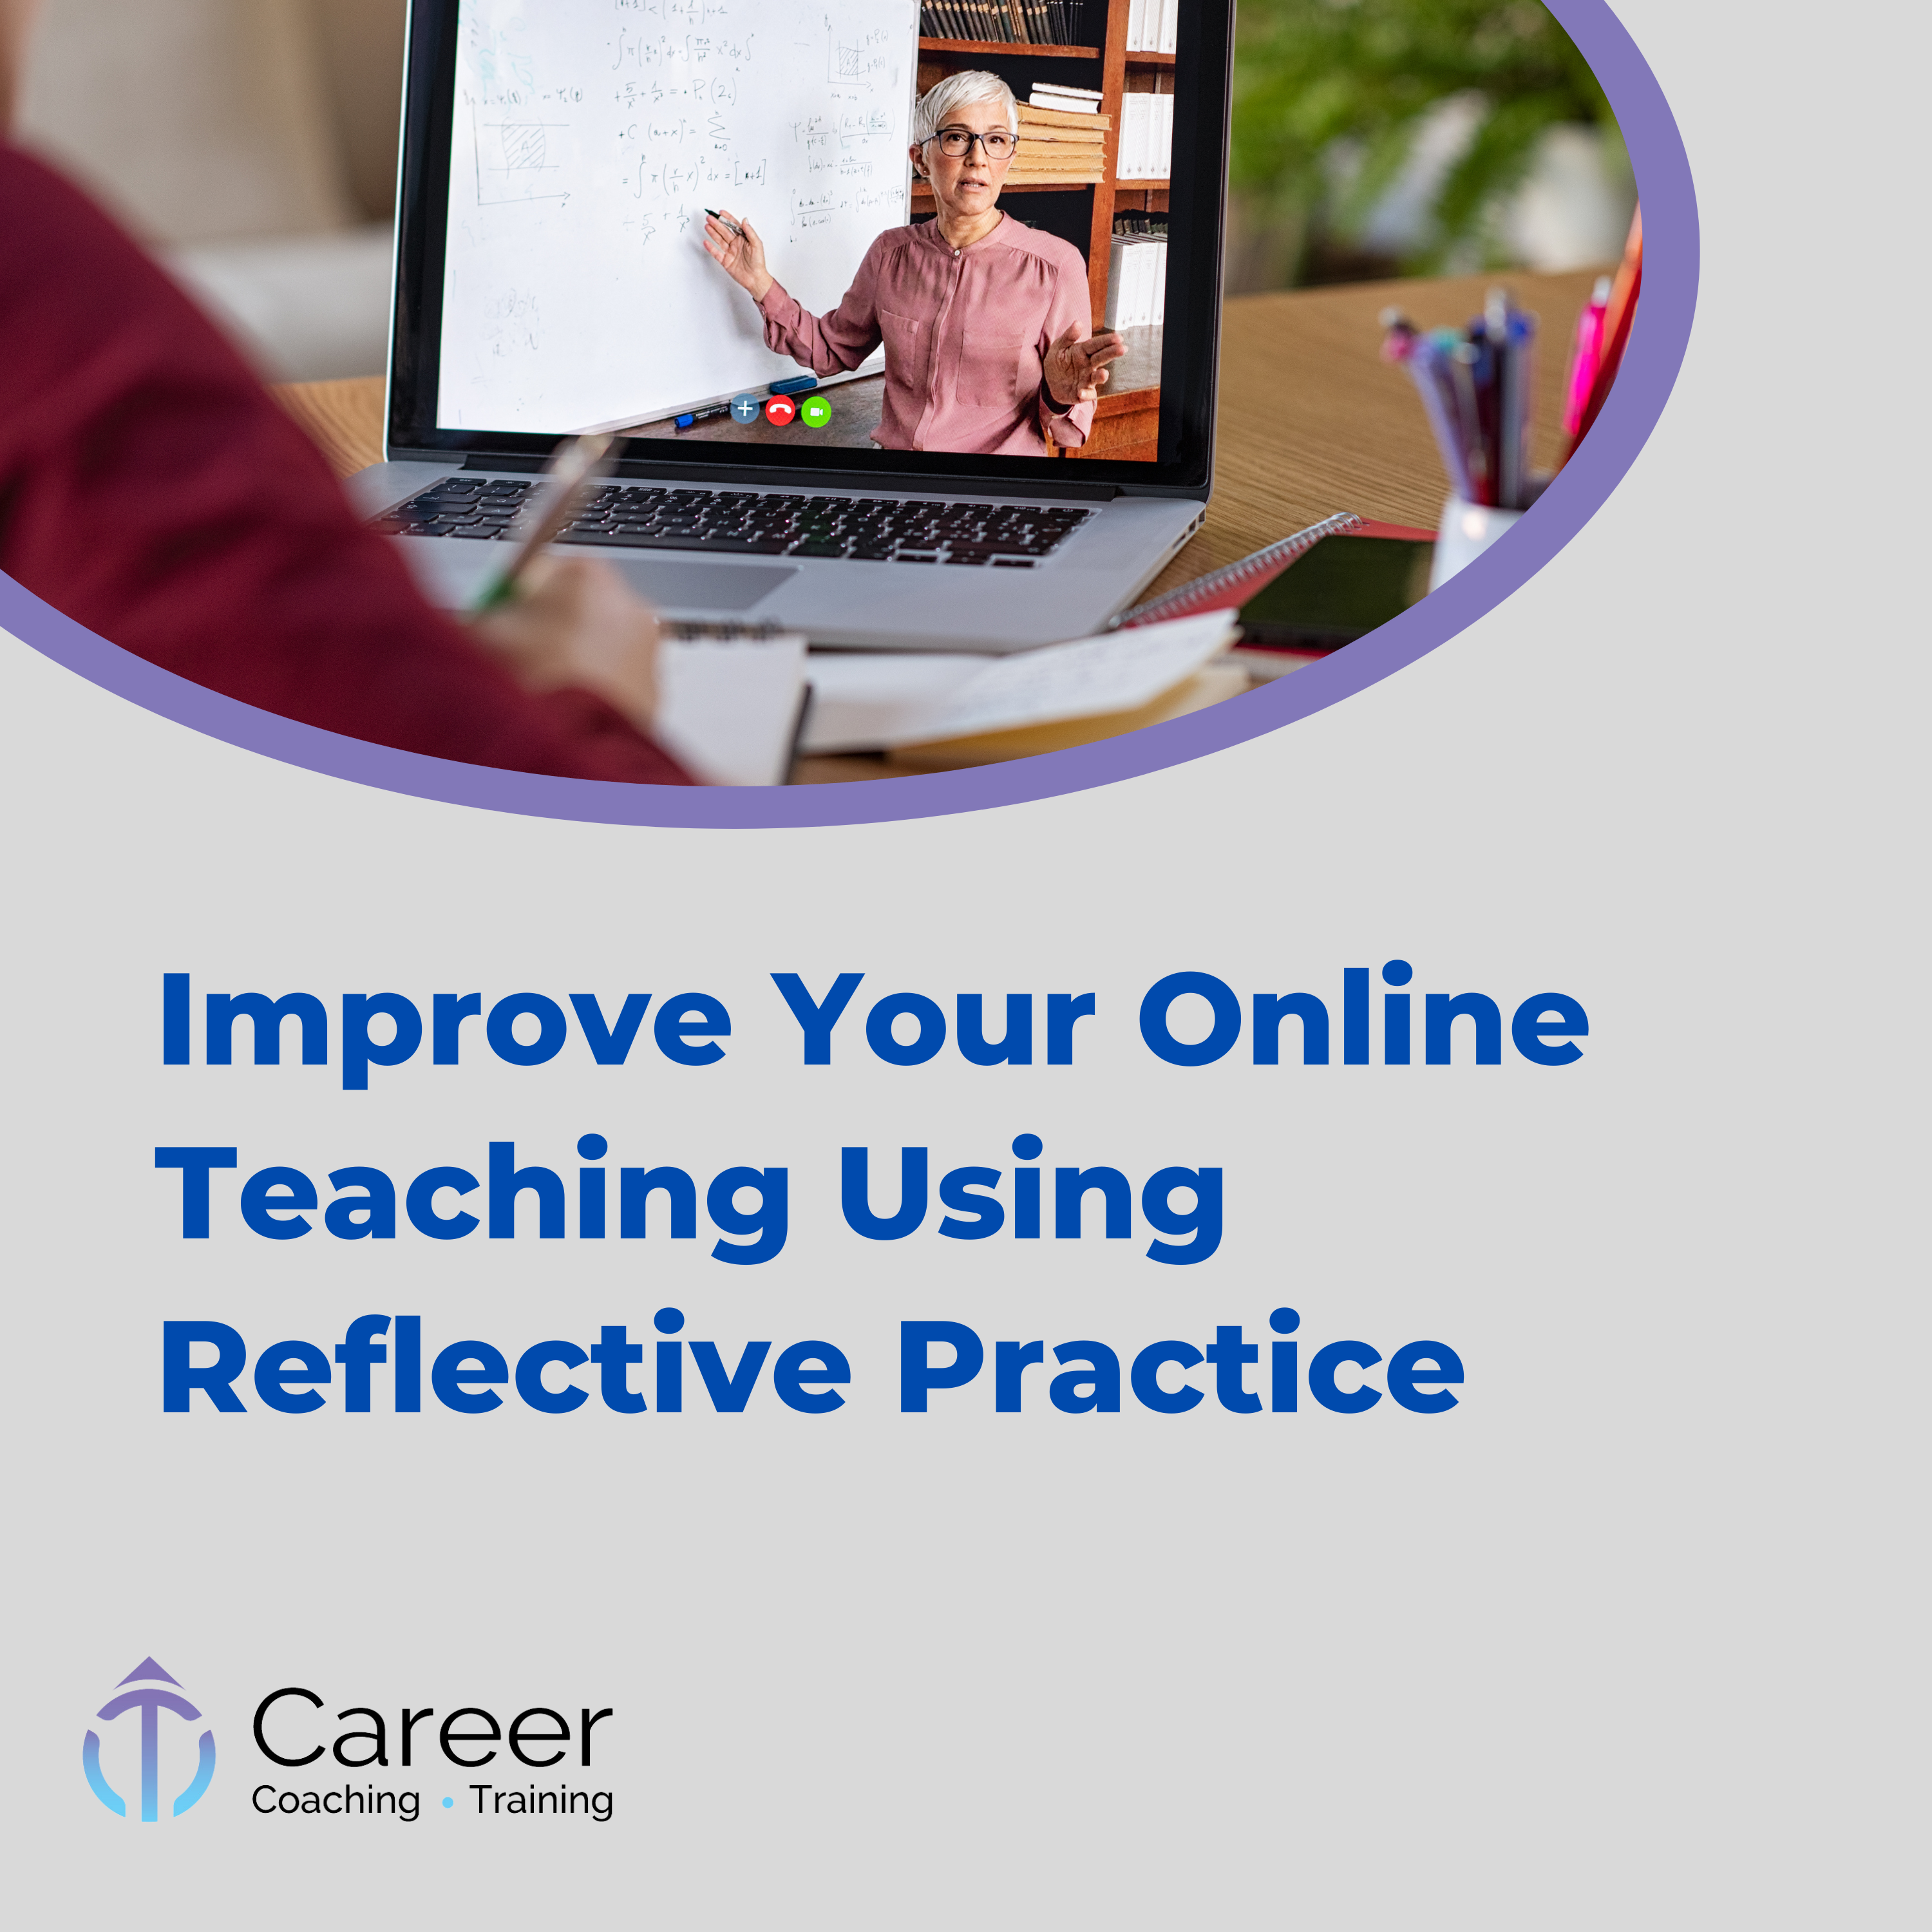 Improve your Online Teaching Using Reflective Practice